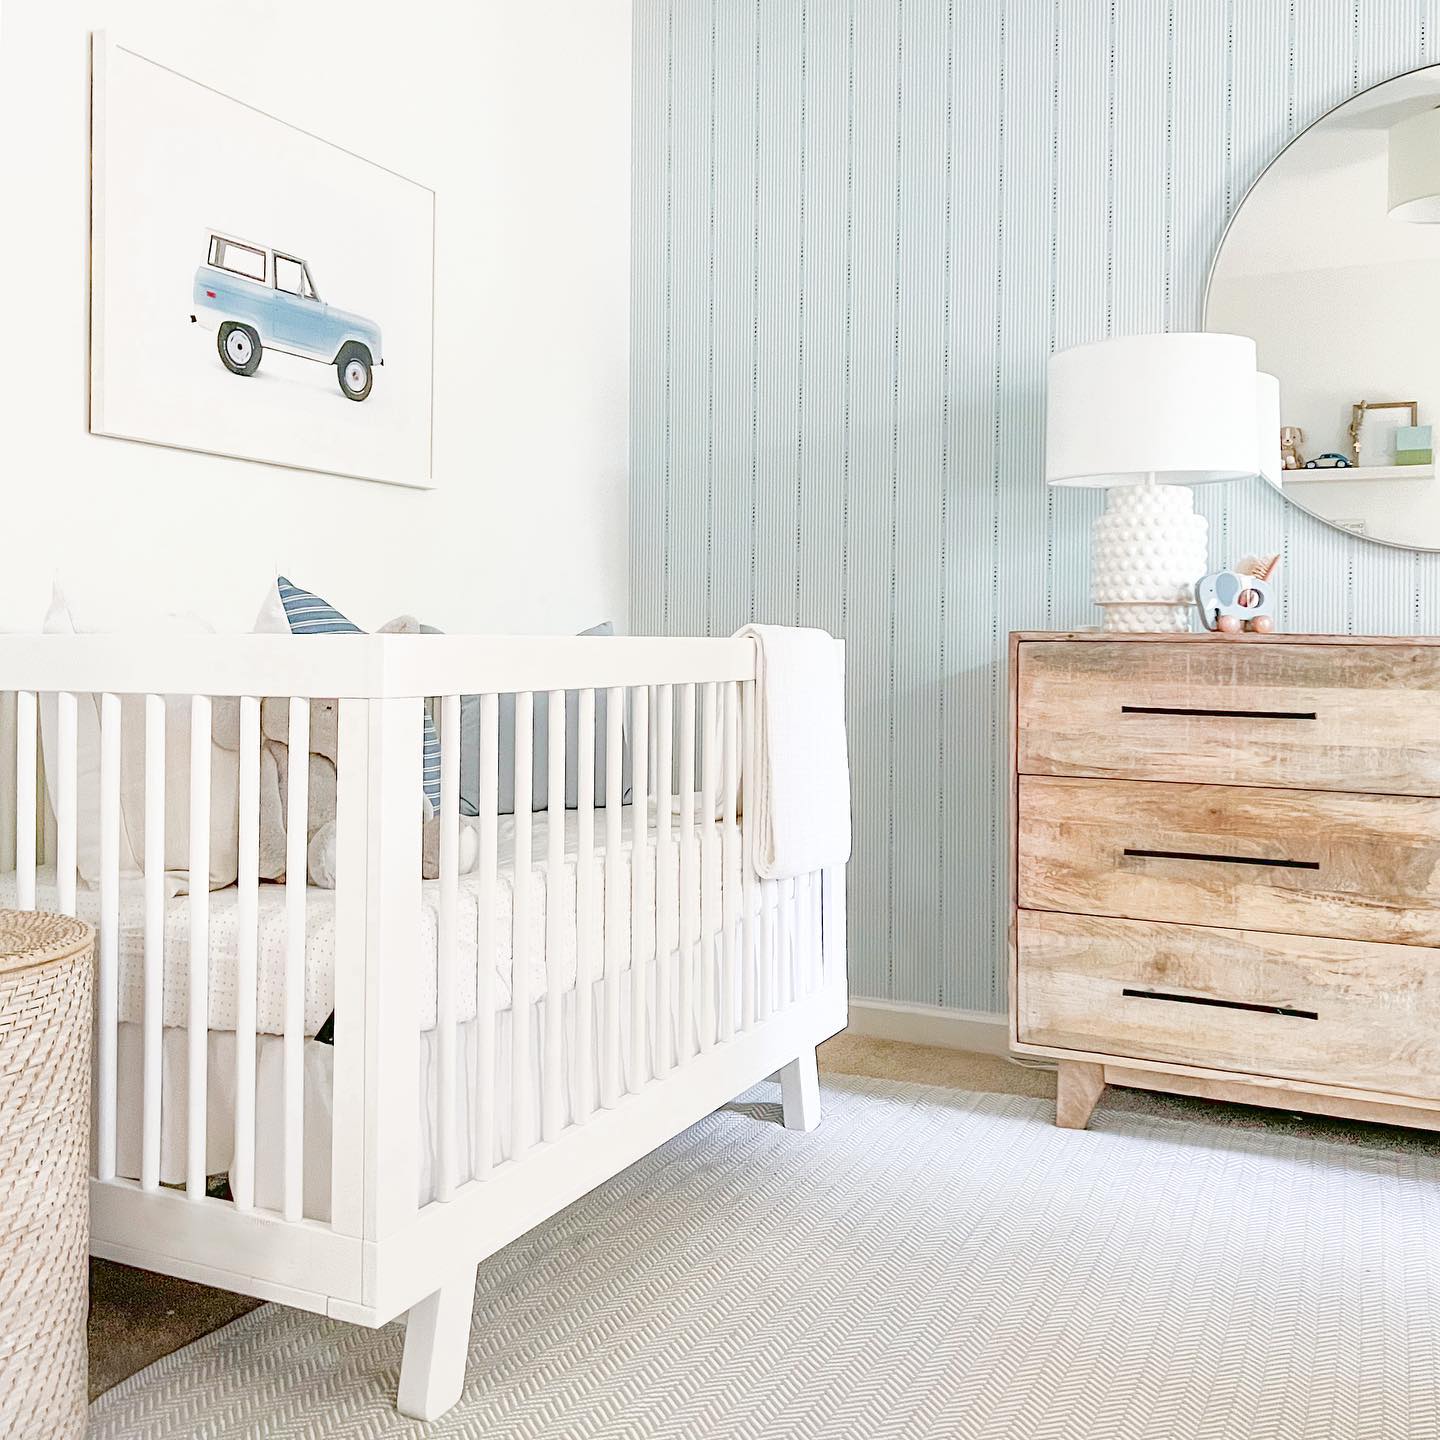 A soft blue nursery with an illustration of a truck behind the crib. Photo by Instagram user @thesimplewhitehome. 